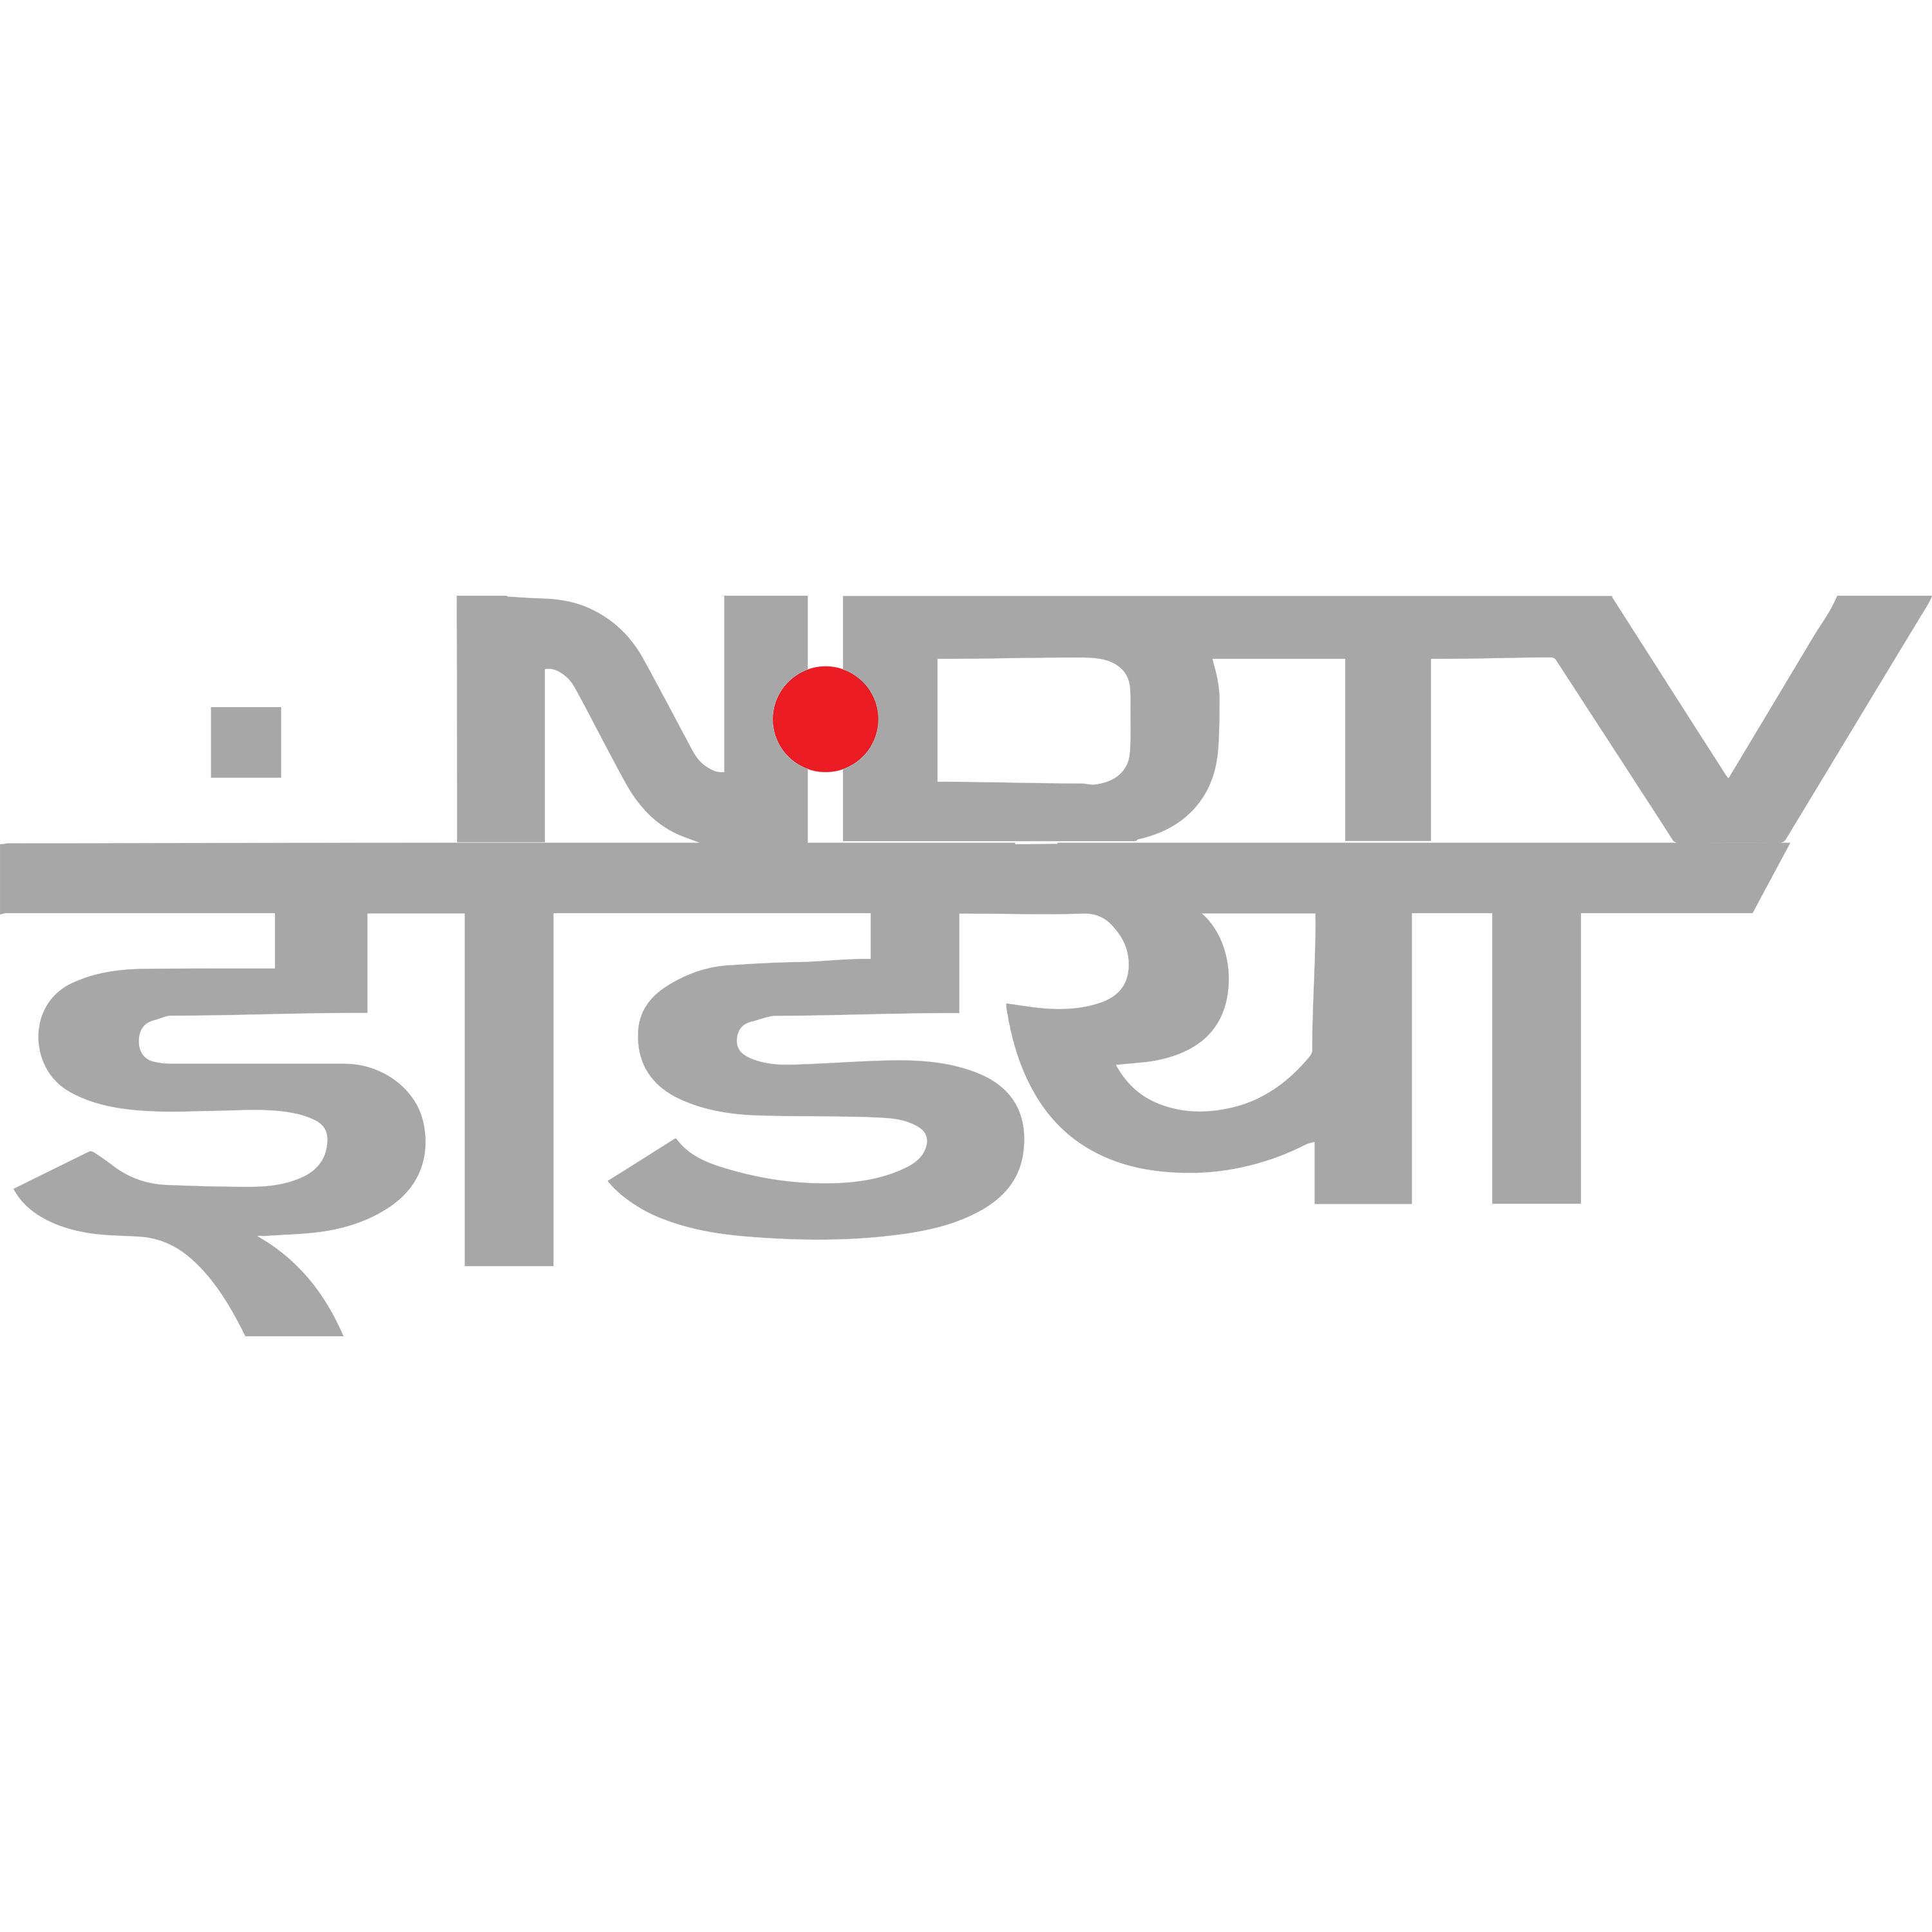 NDTV India Logo Transparent Picture